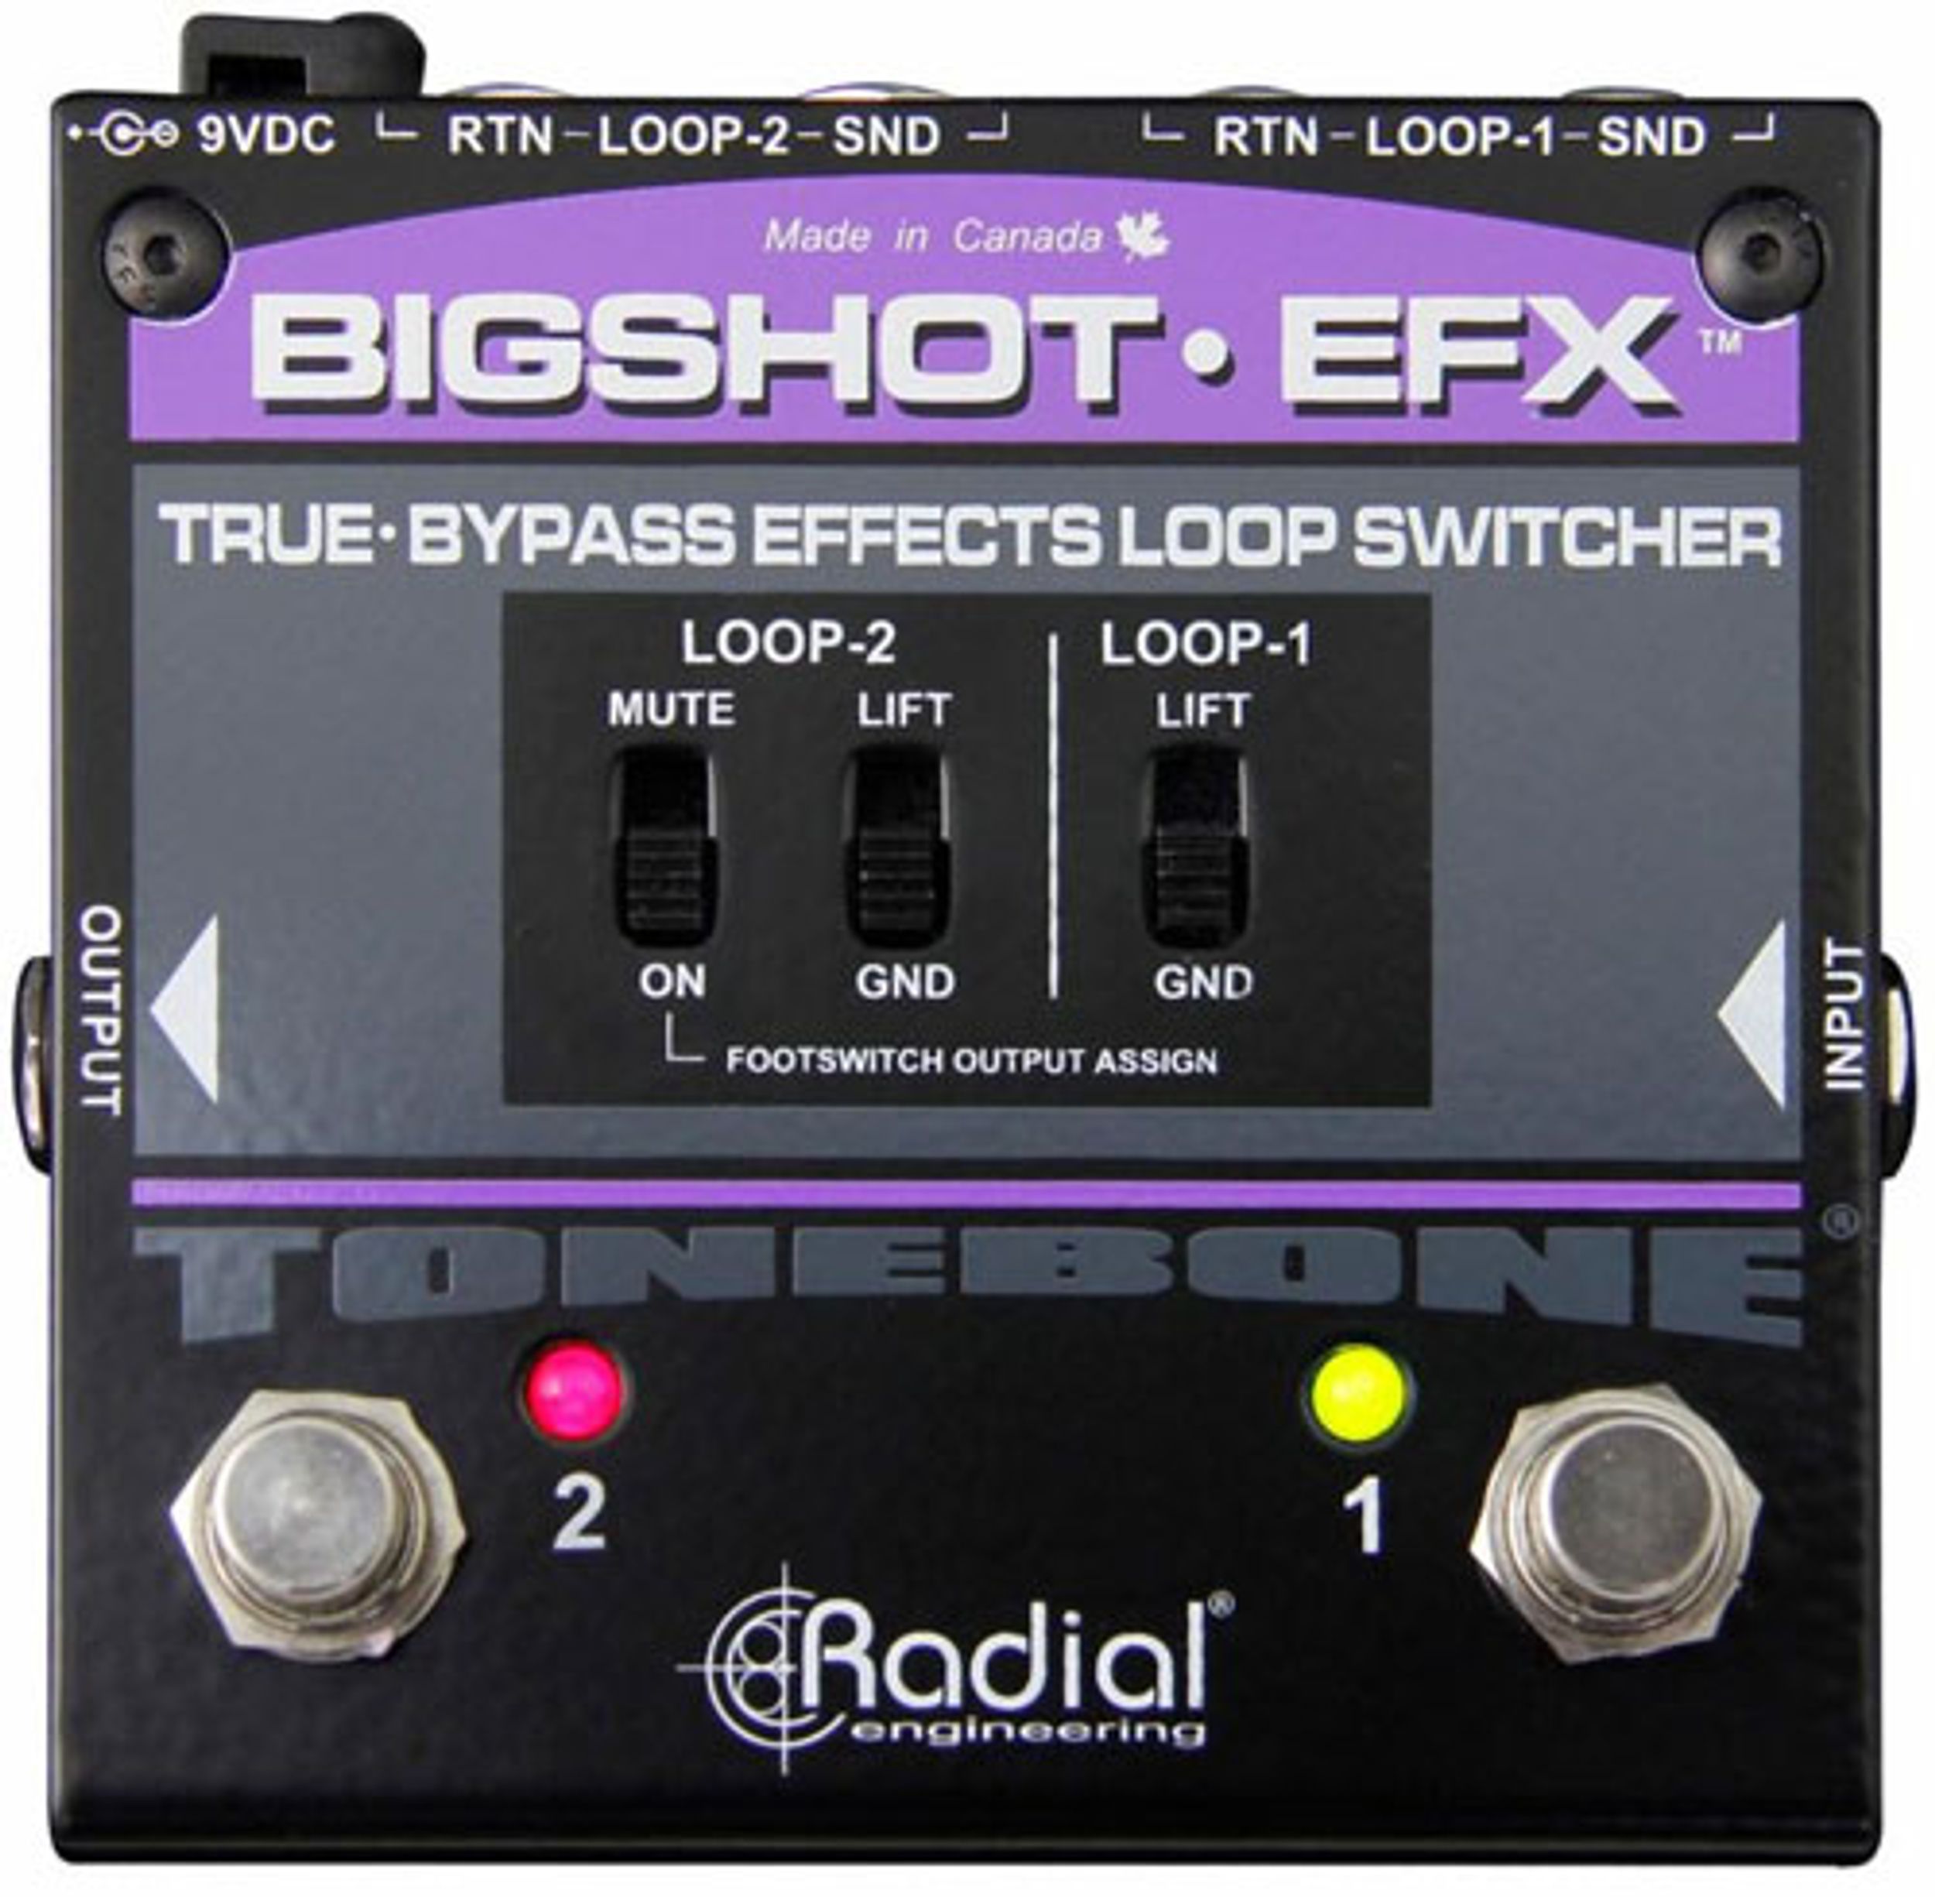 Radial Engineering Introduces the BigShot EFX